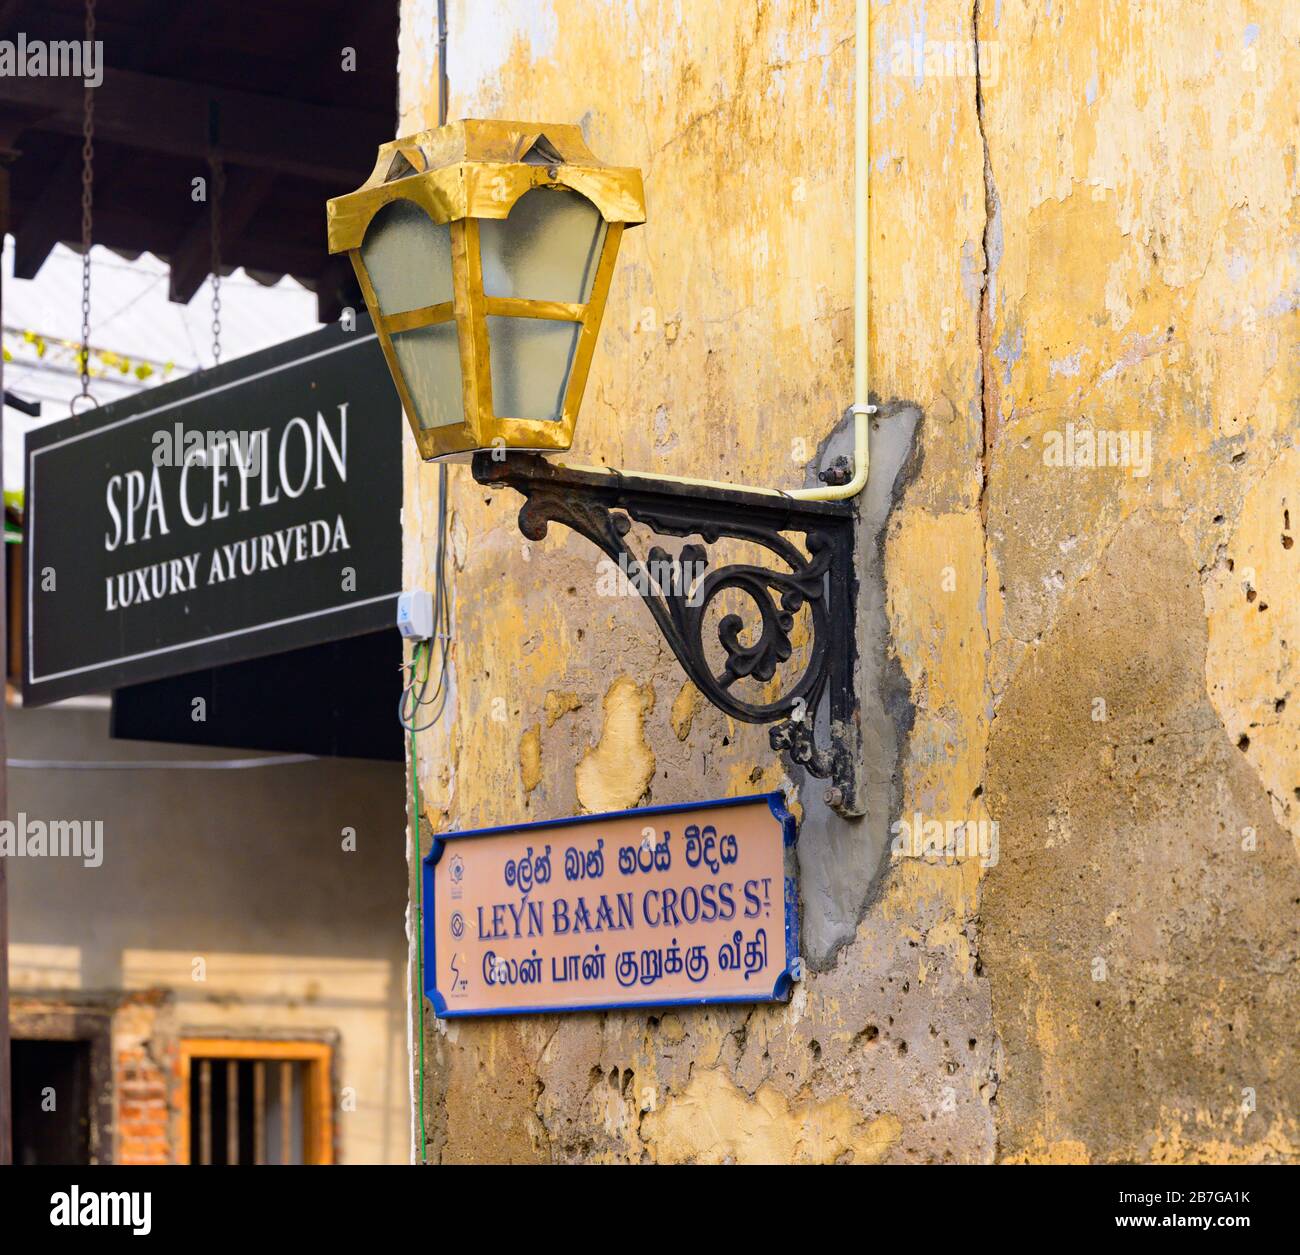 South Asia Sri Lanka Fort Galle colonial town centre old ancient harbour port street scene light Leyn Baan Cross St sign script Spa Ceylon shop signs Stock Photo